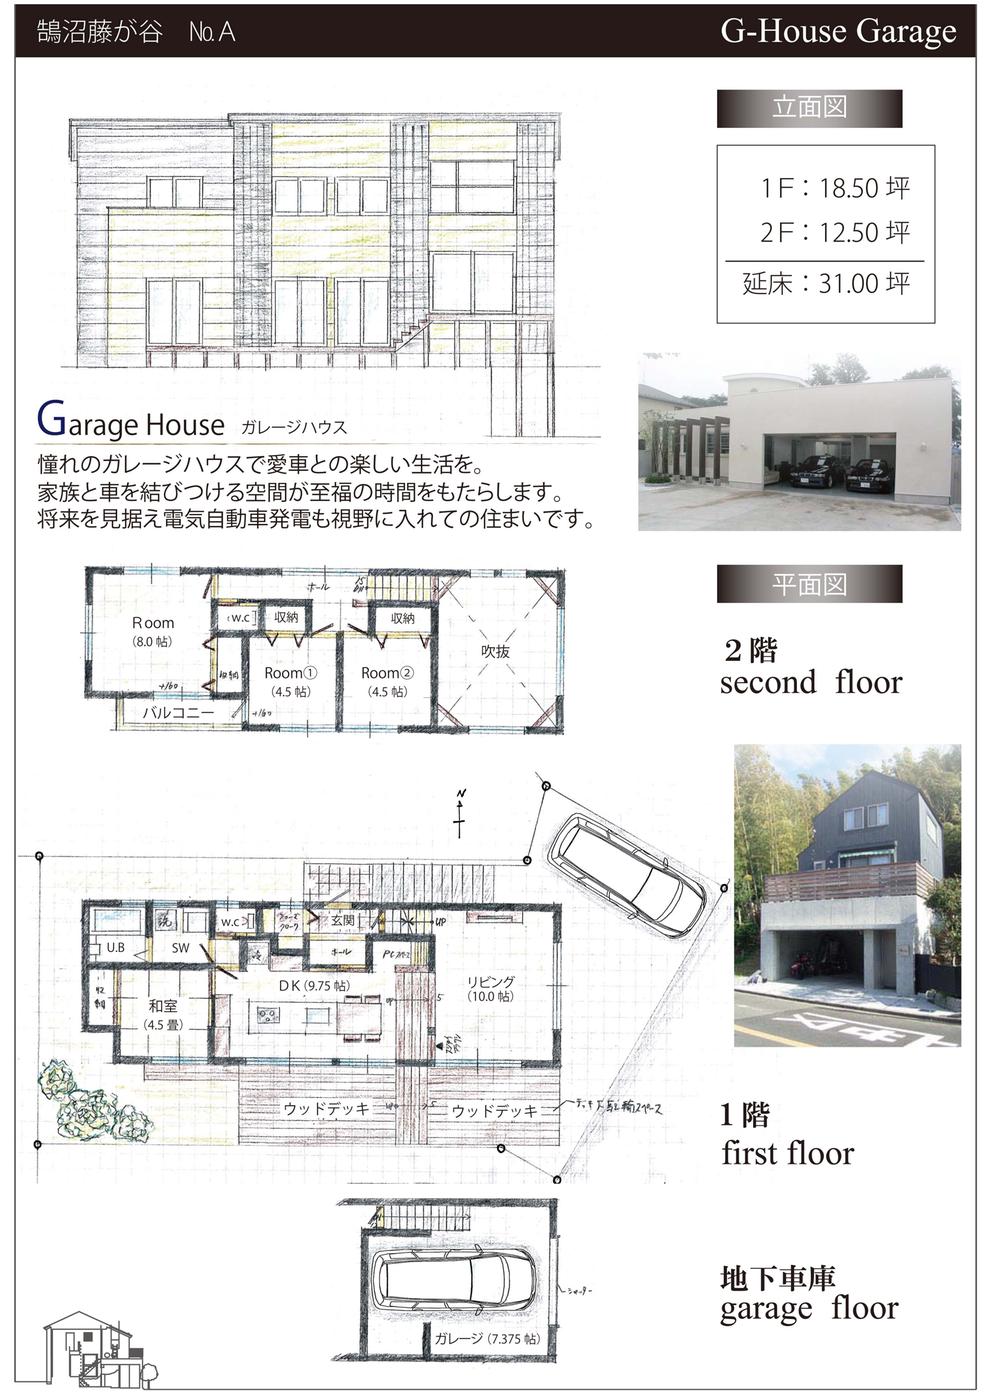 Other building plan example. A compartment building reference plan ~ Garage House ~